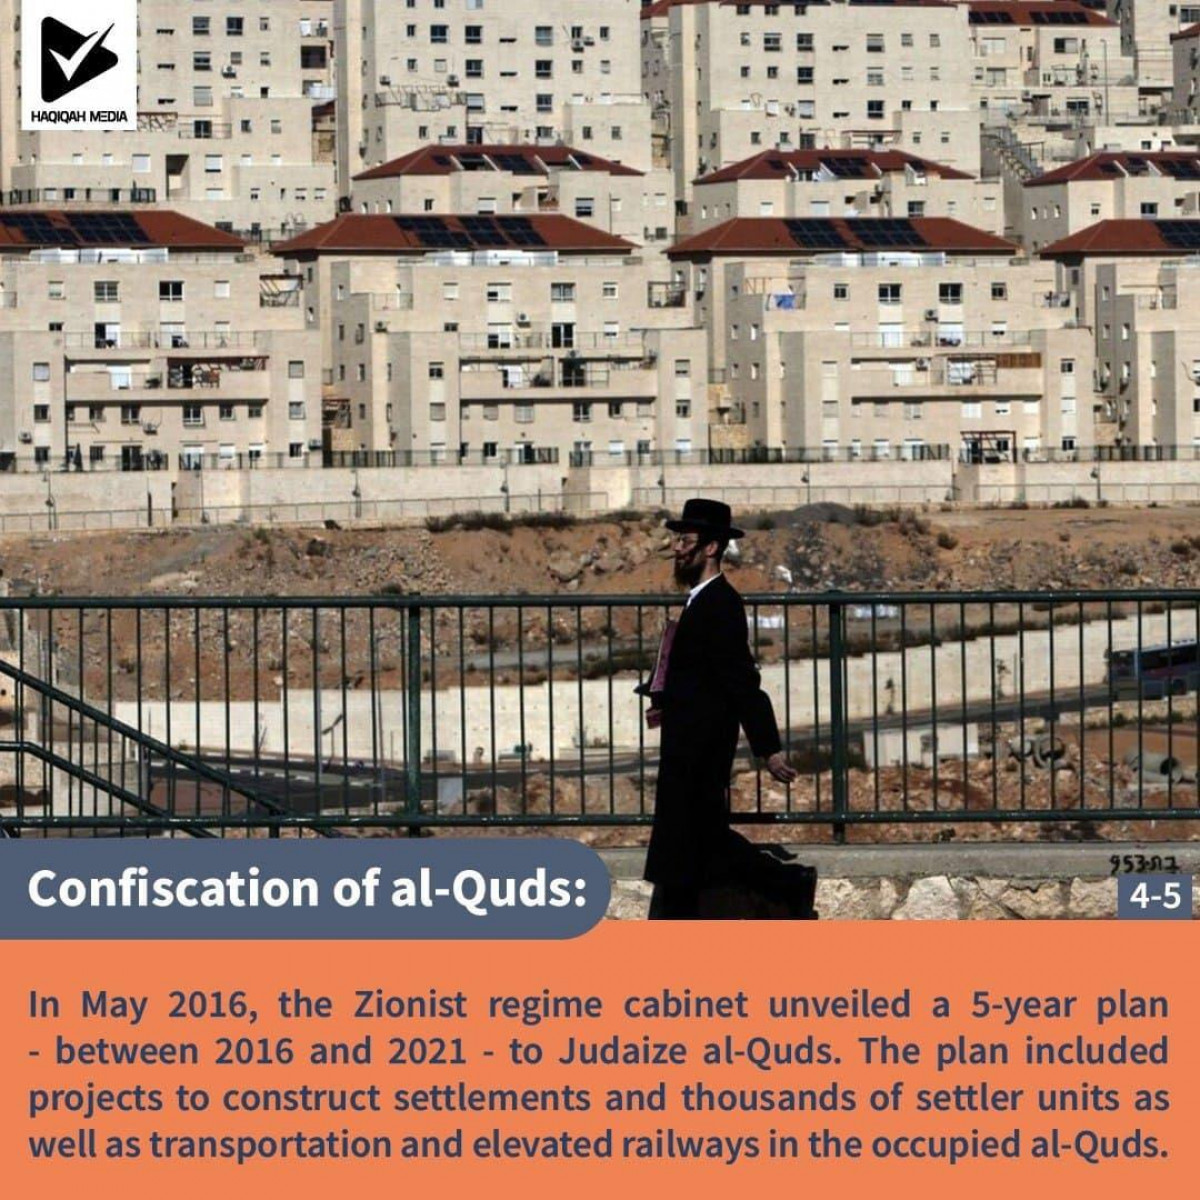 Confiscation of al-Quds 4